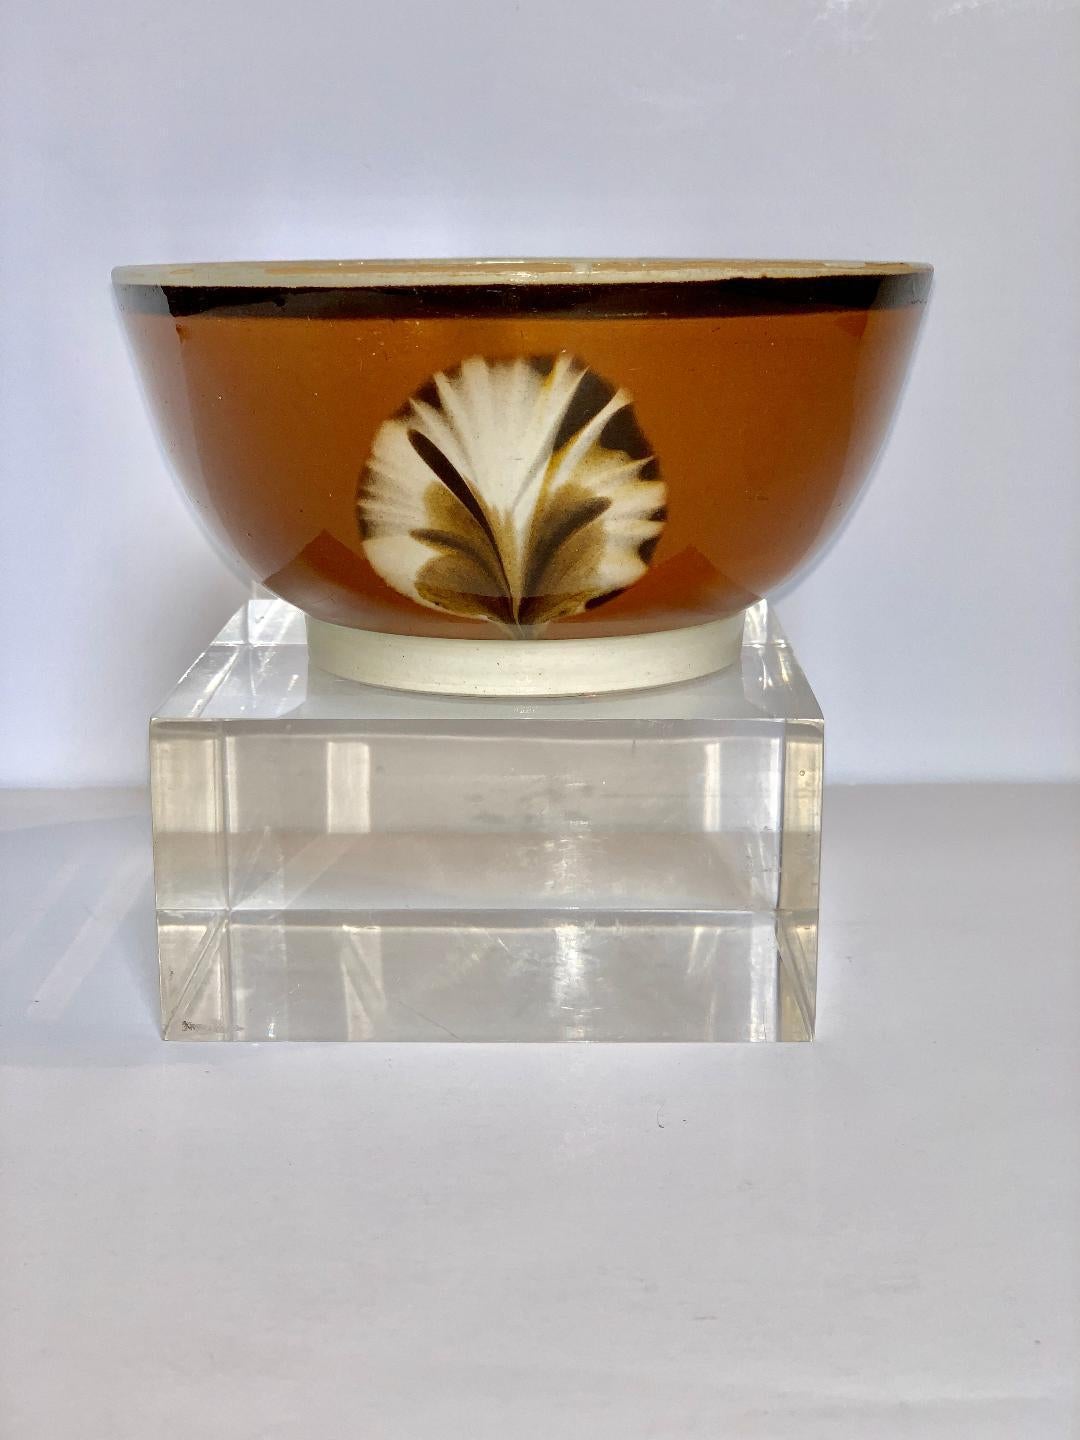 We are excited to offer this mocha ware bowl with dipped fan decoration. Made in England, circa 1800. This bowl is one of our rarest and best pieces. The bowl has a medium brown slipware ground (the rim has very slight fritting) and is decorated